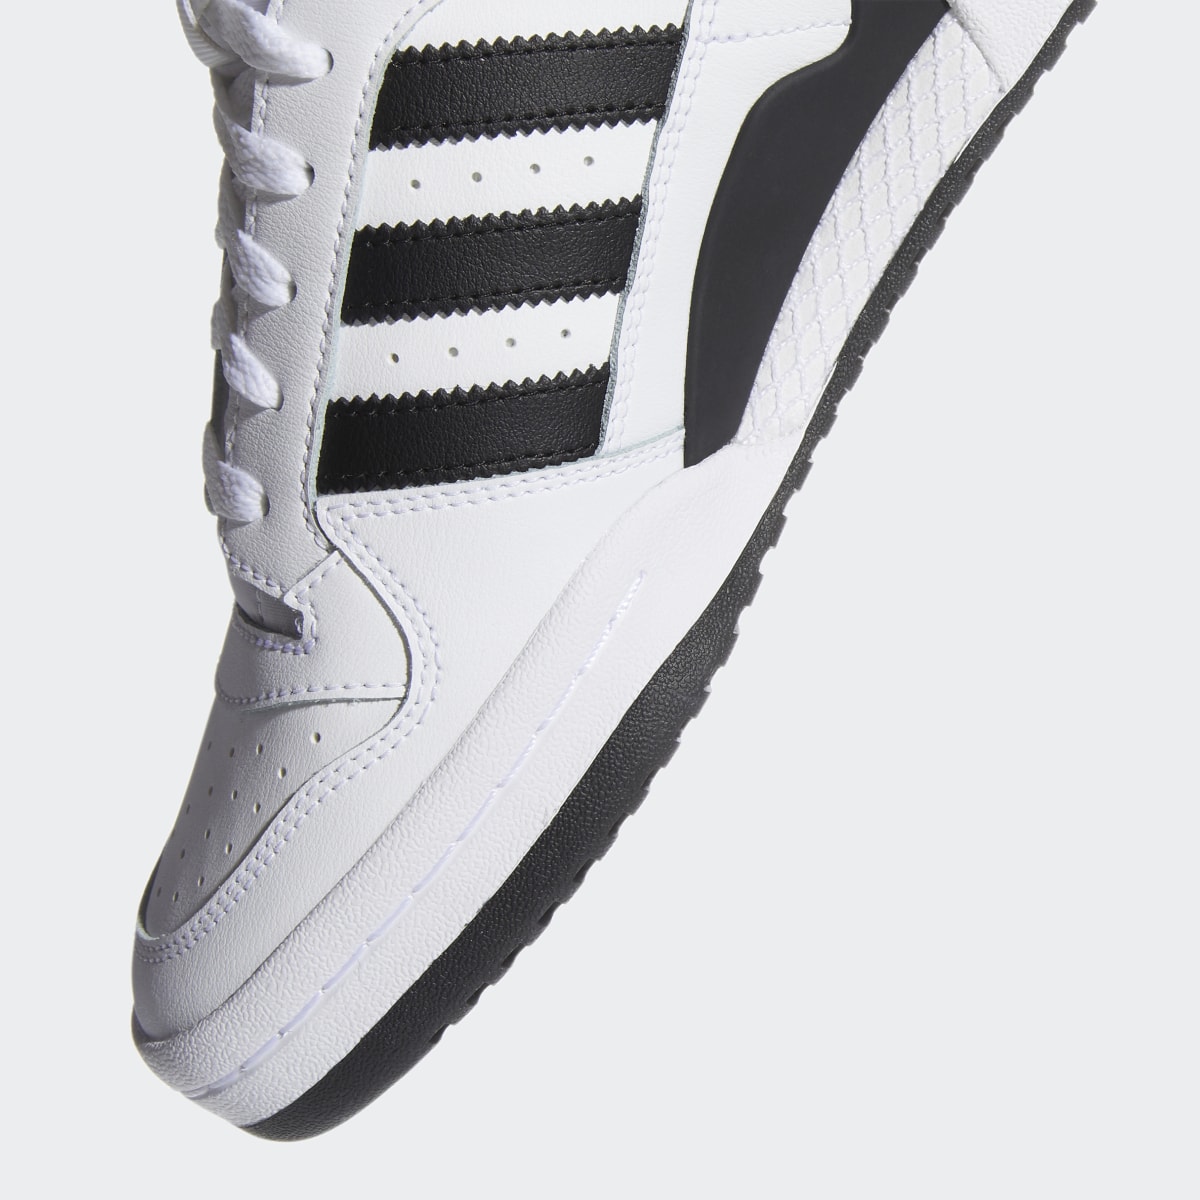 Adidas Forum Mid Shoes. 10